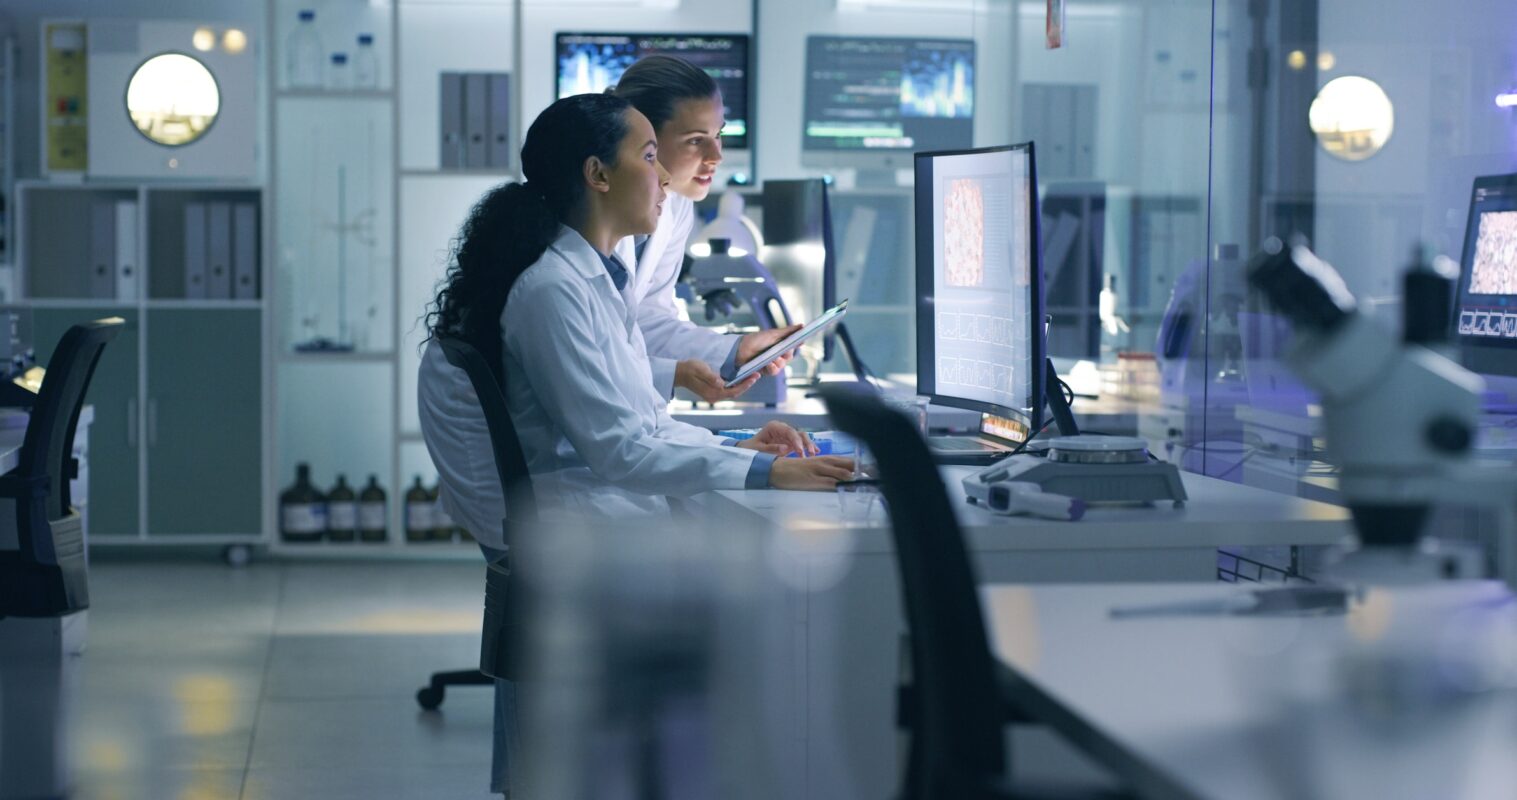 Focused, serious medical scientists analyzing research scans on a computer, working late in the laboratory. Lab workers examine and talk about results from a checkup while working overtime